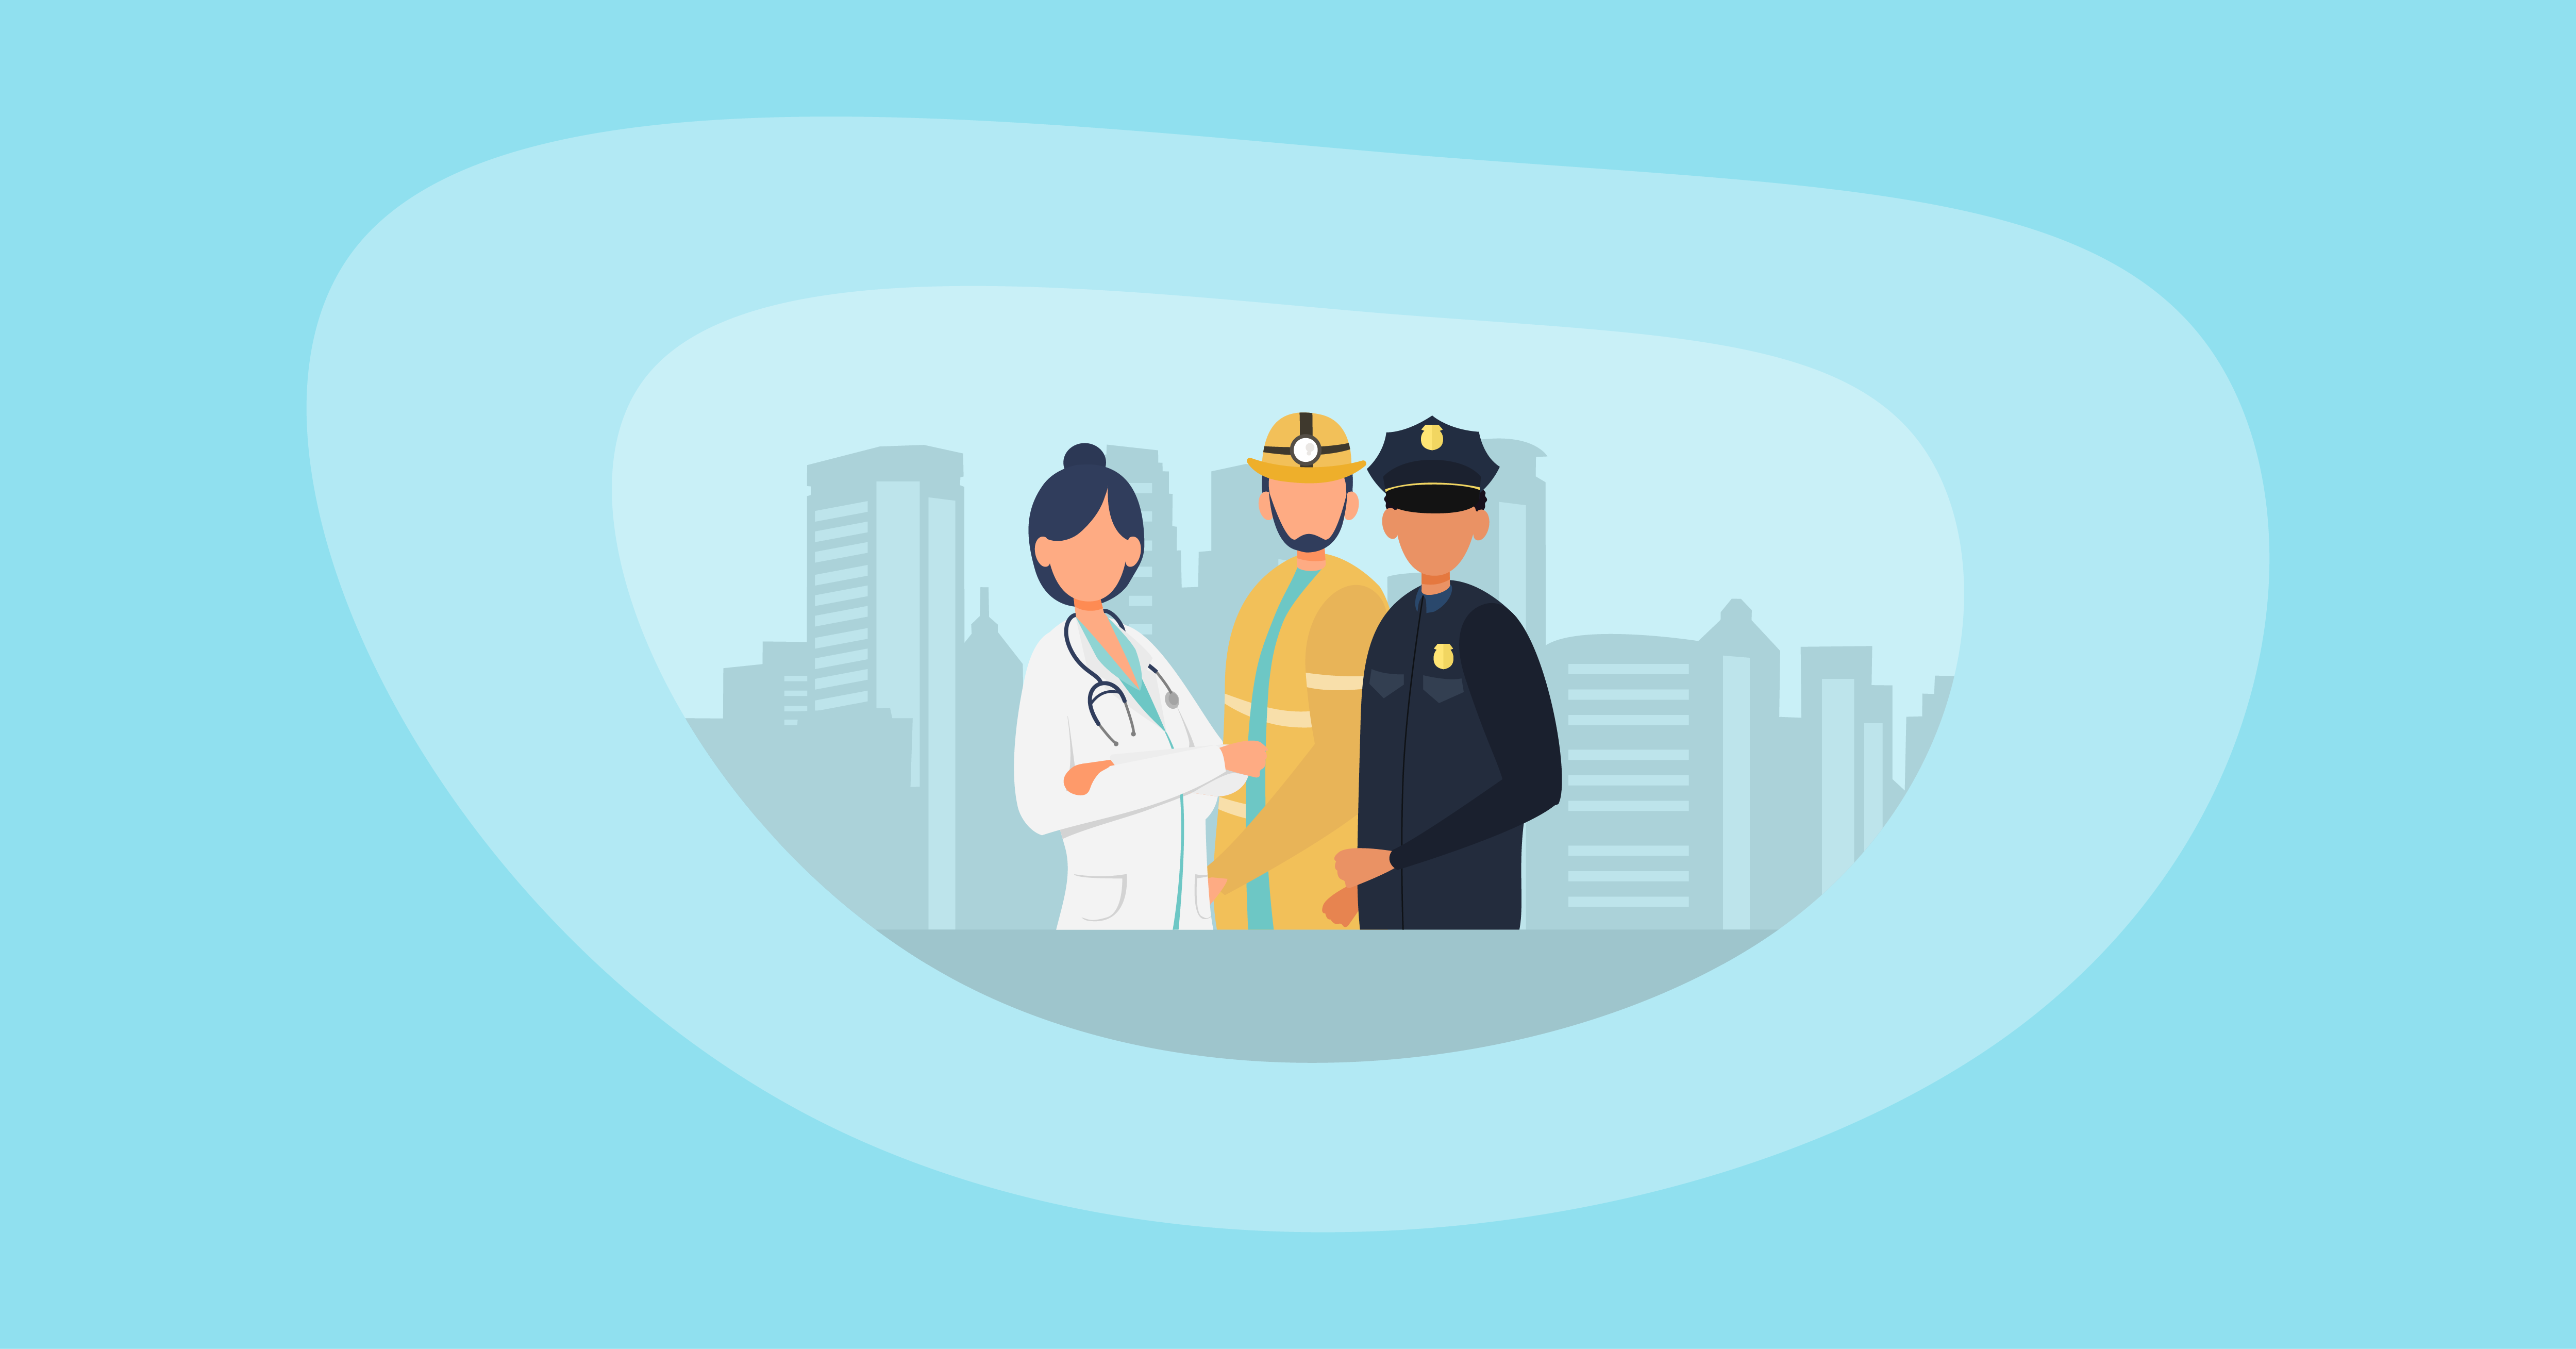 Attempted illustration of three public safety officials